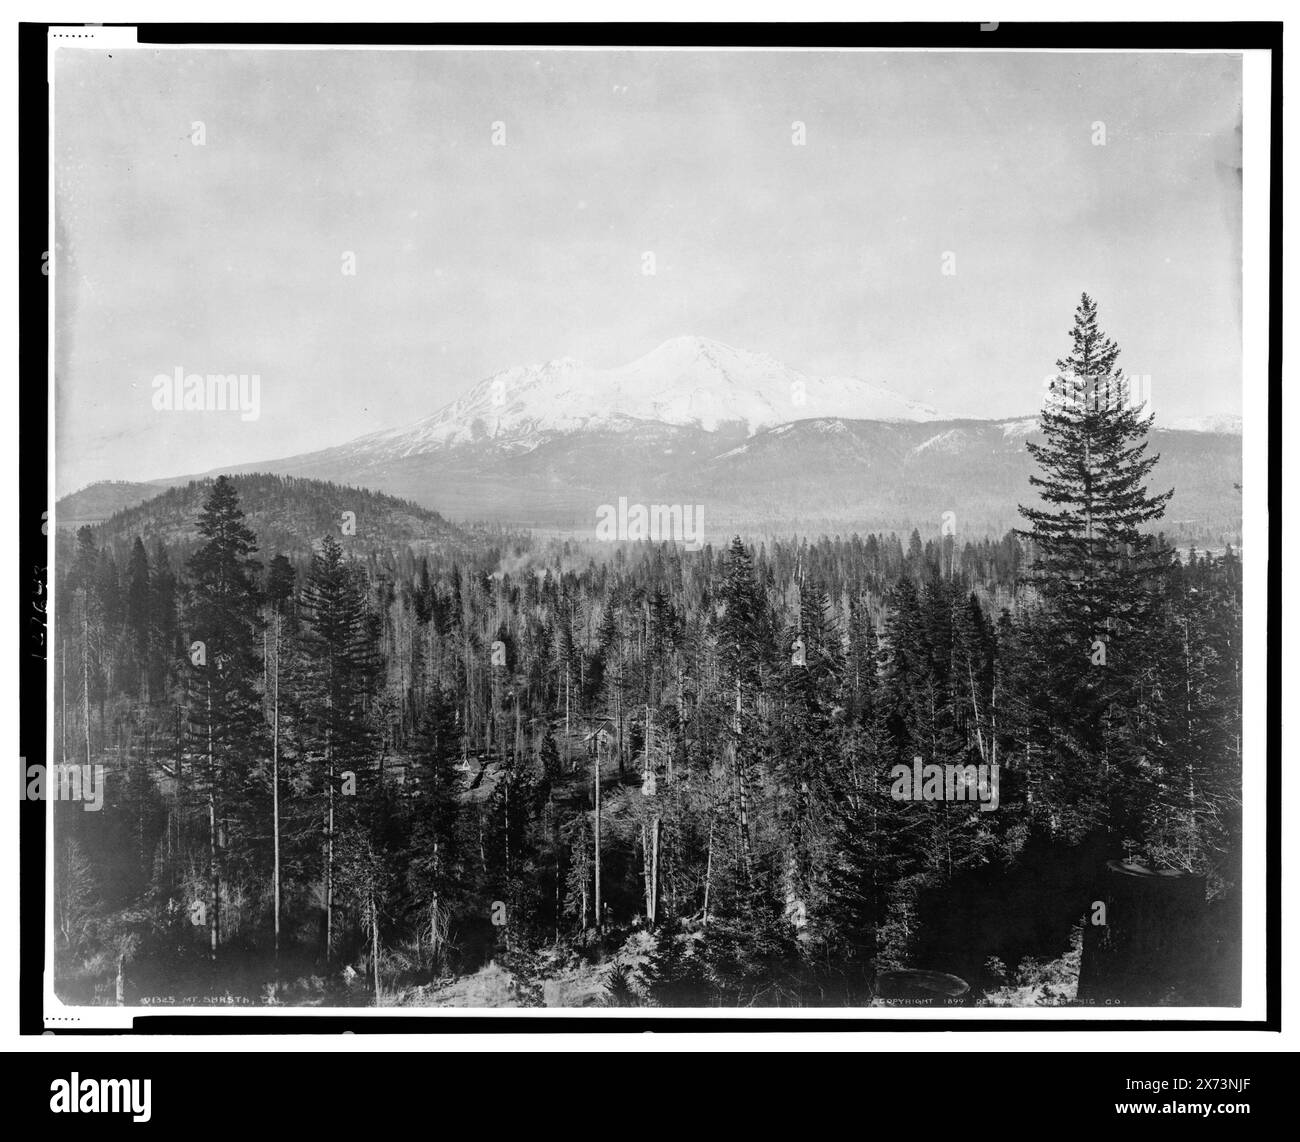 Mt. Shasta, Cal., 'Detroit Photographic Co.', Listed in Detroit, Catalogue F (1899)., Copyright deposit no. 61196., Detroit Publishing Co. no. 01325., Copyright deposit. State Historical Society of Colorado; 1949,  Mountains. , United States, California, Shasta, Mount. Stock Photo